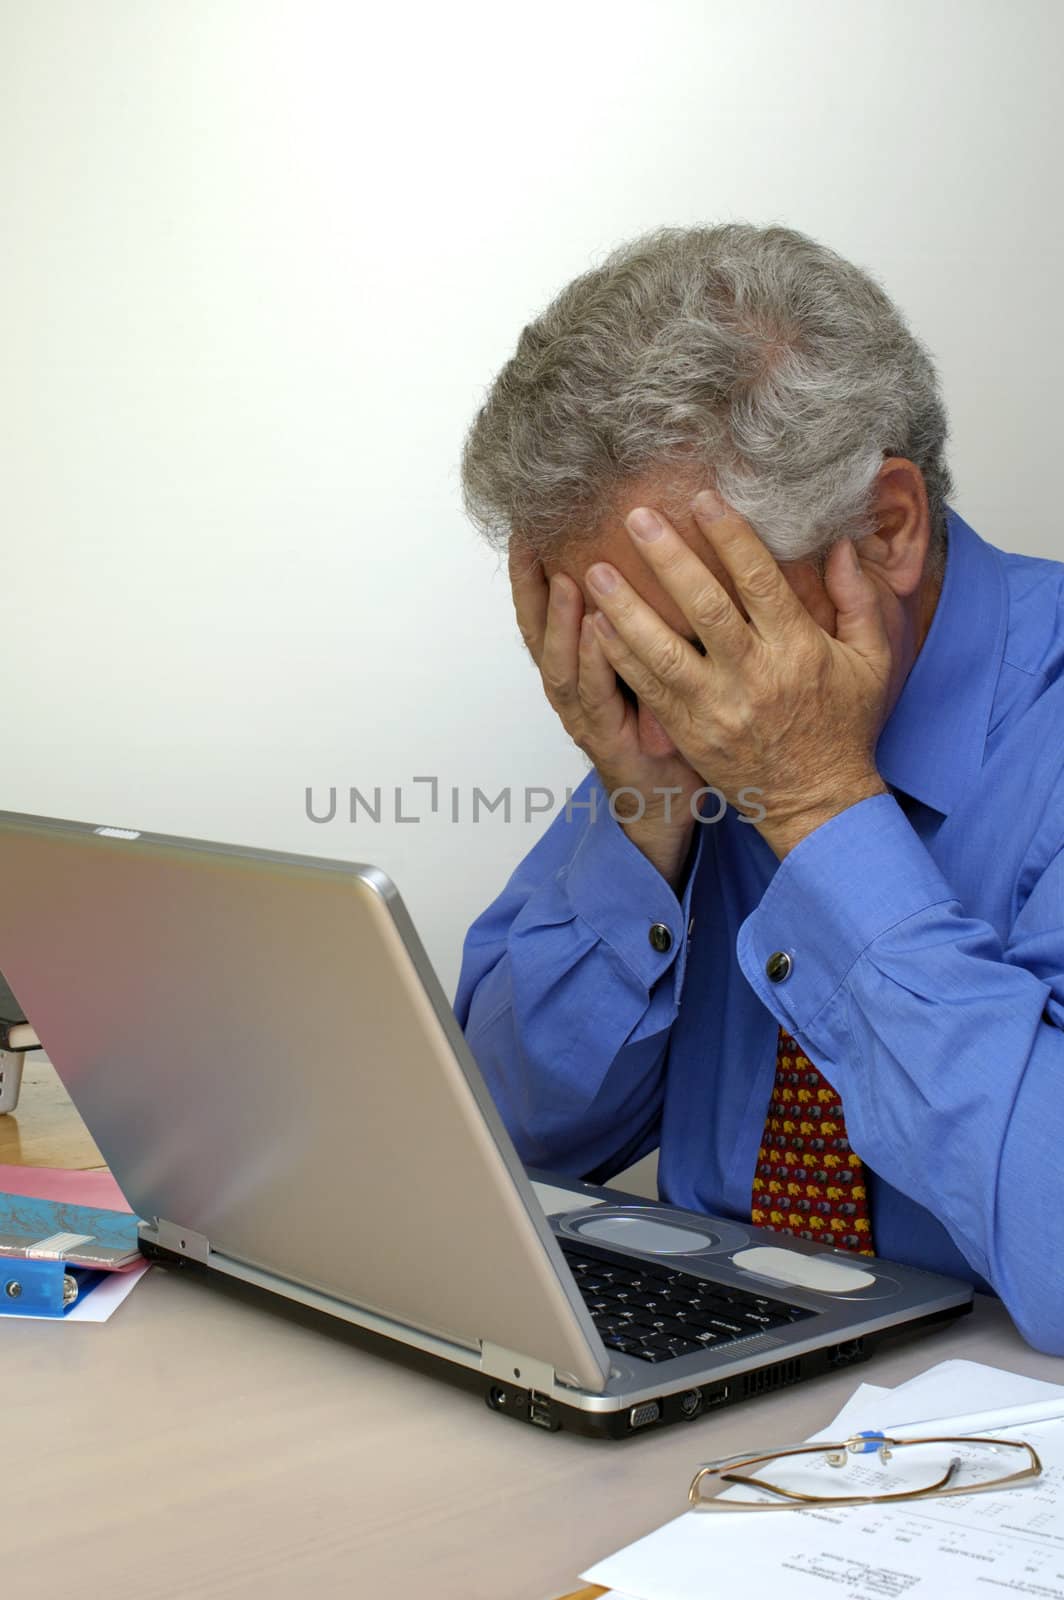 A businessman holds his head in his hands in front of his laptop computer, in despair. Space for text on the white background.